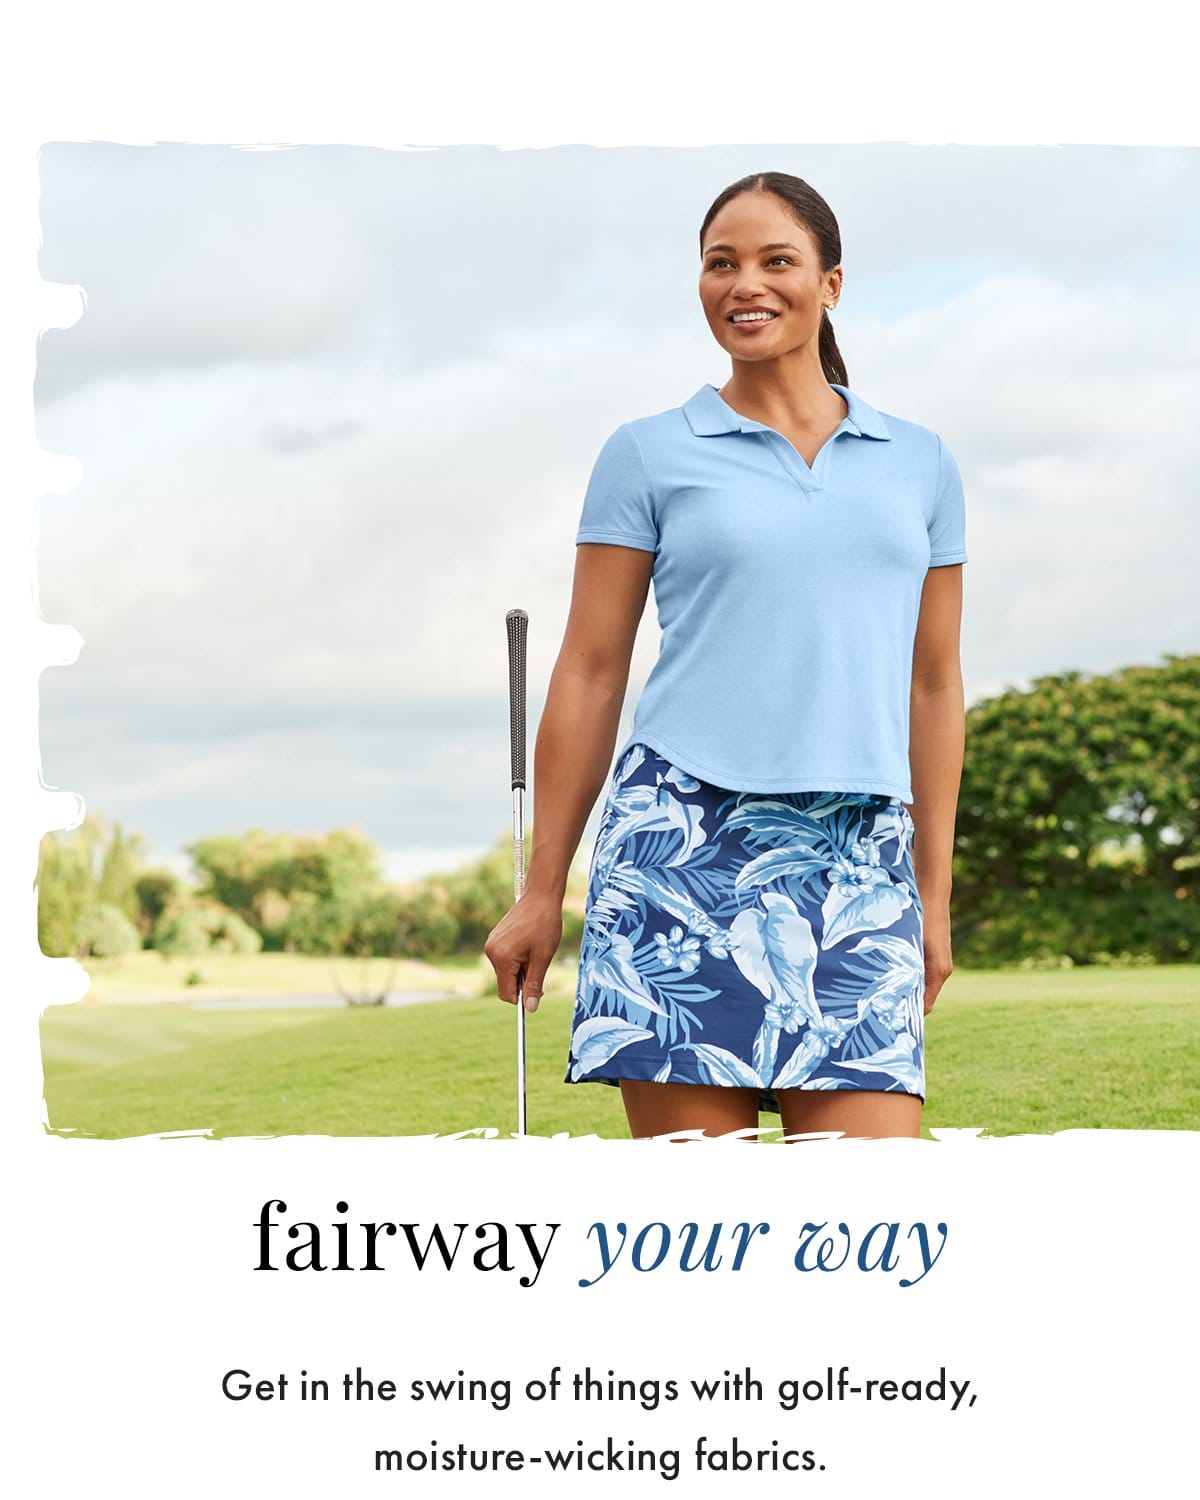 Fairway your way. Get in the swing of things with golf-ready, moisture-wicking fabrics.